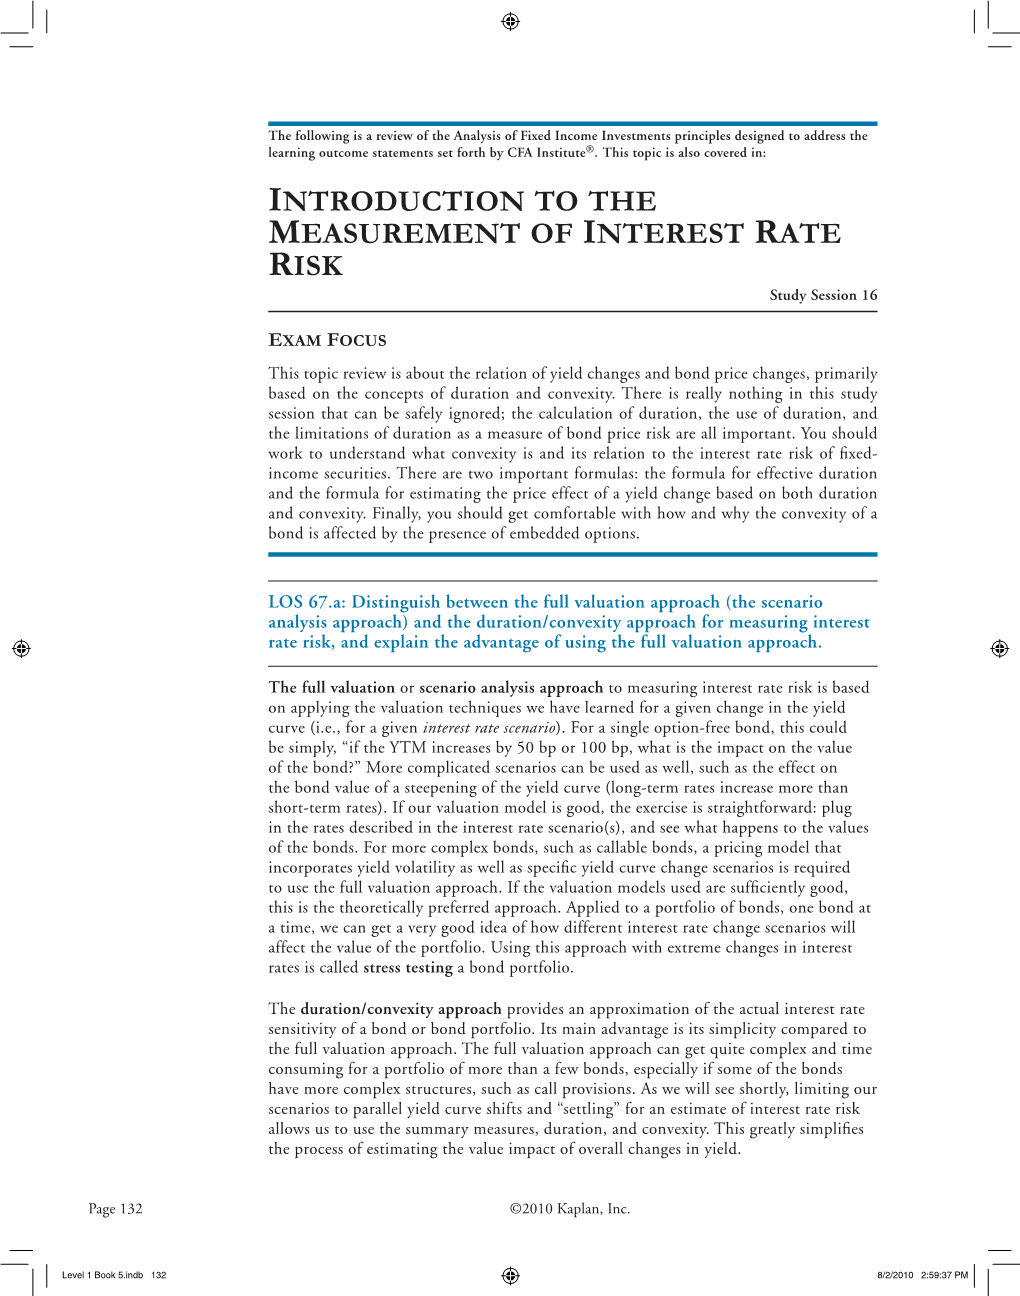 Introduction to the Measurement of Interest Rate Risk